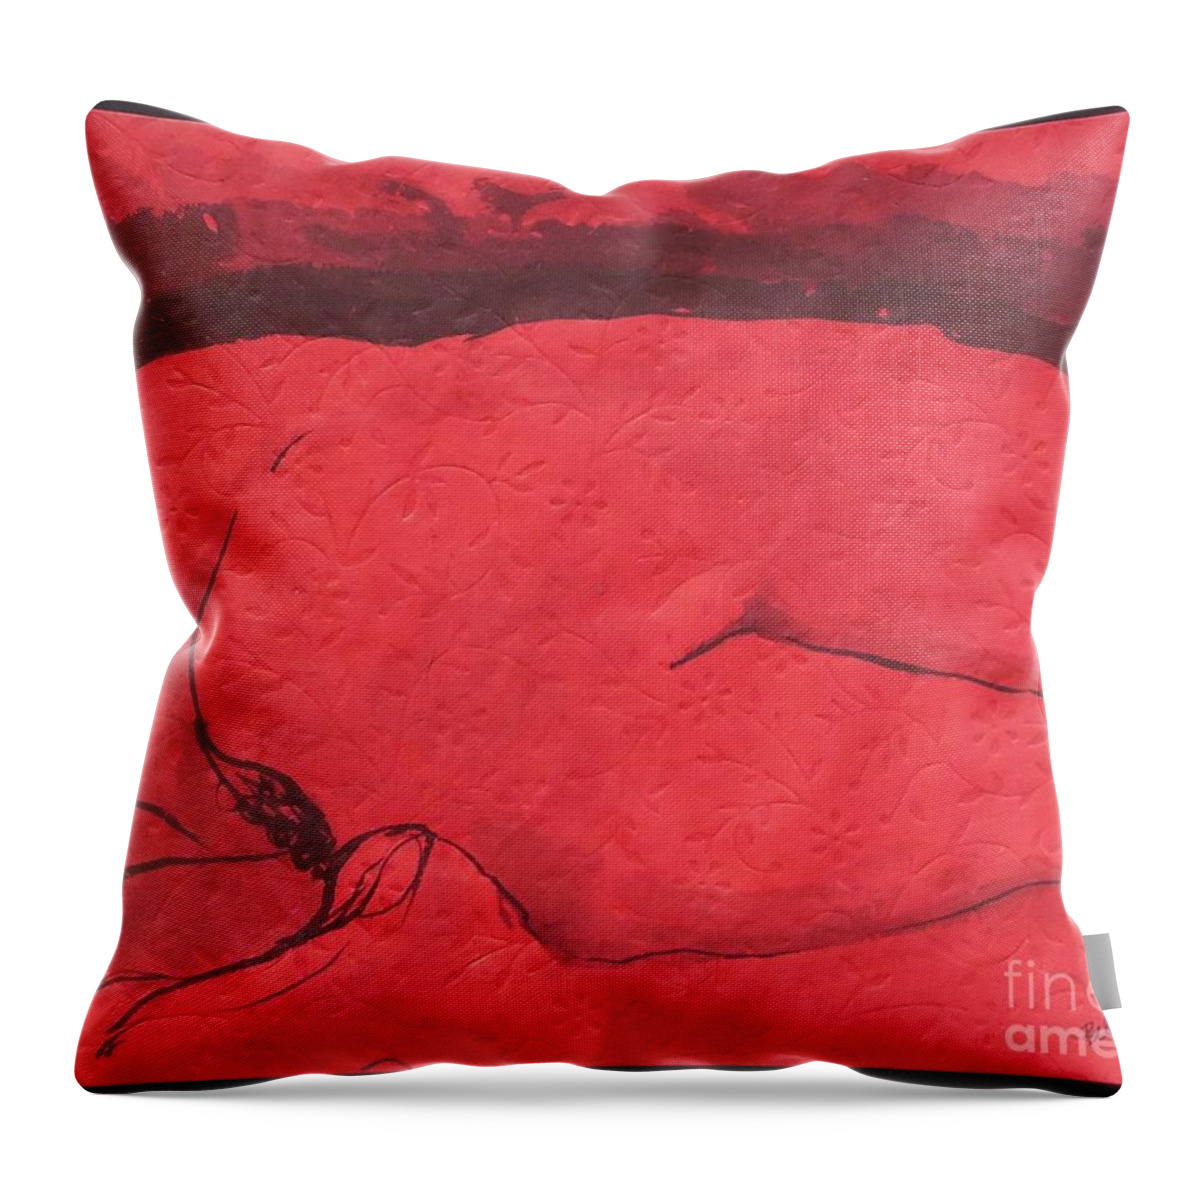 Nude Throw Pillow featuring the drawing Red by M Bellavia